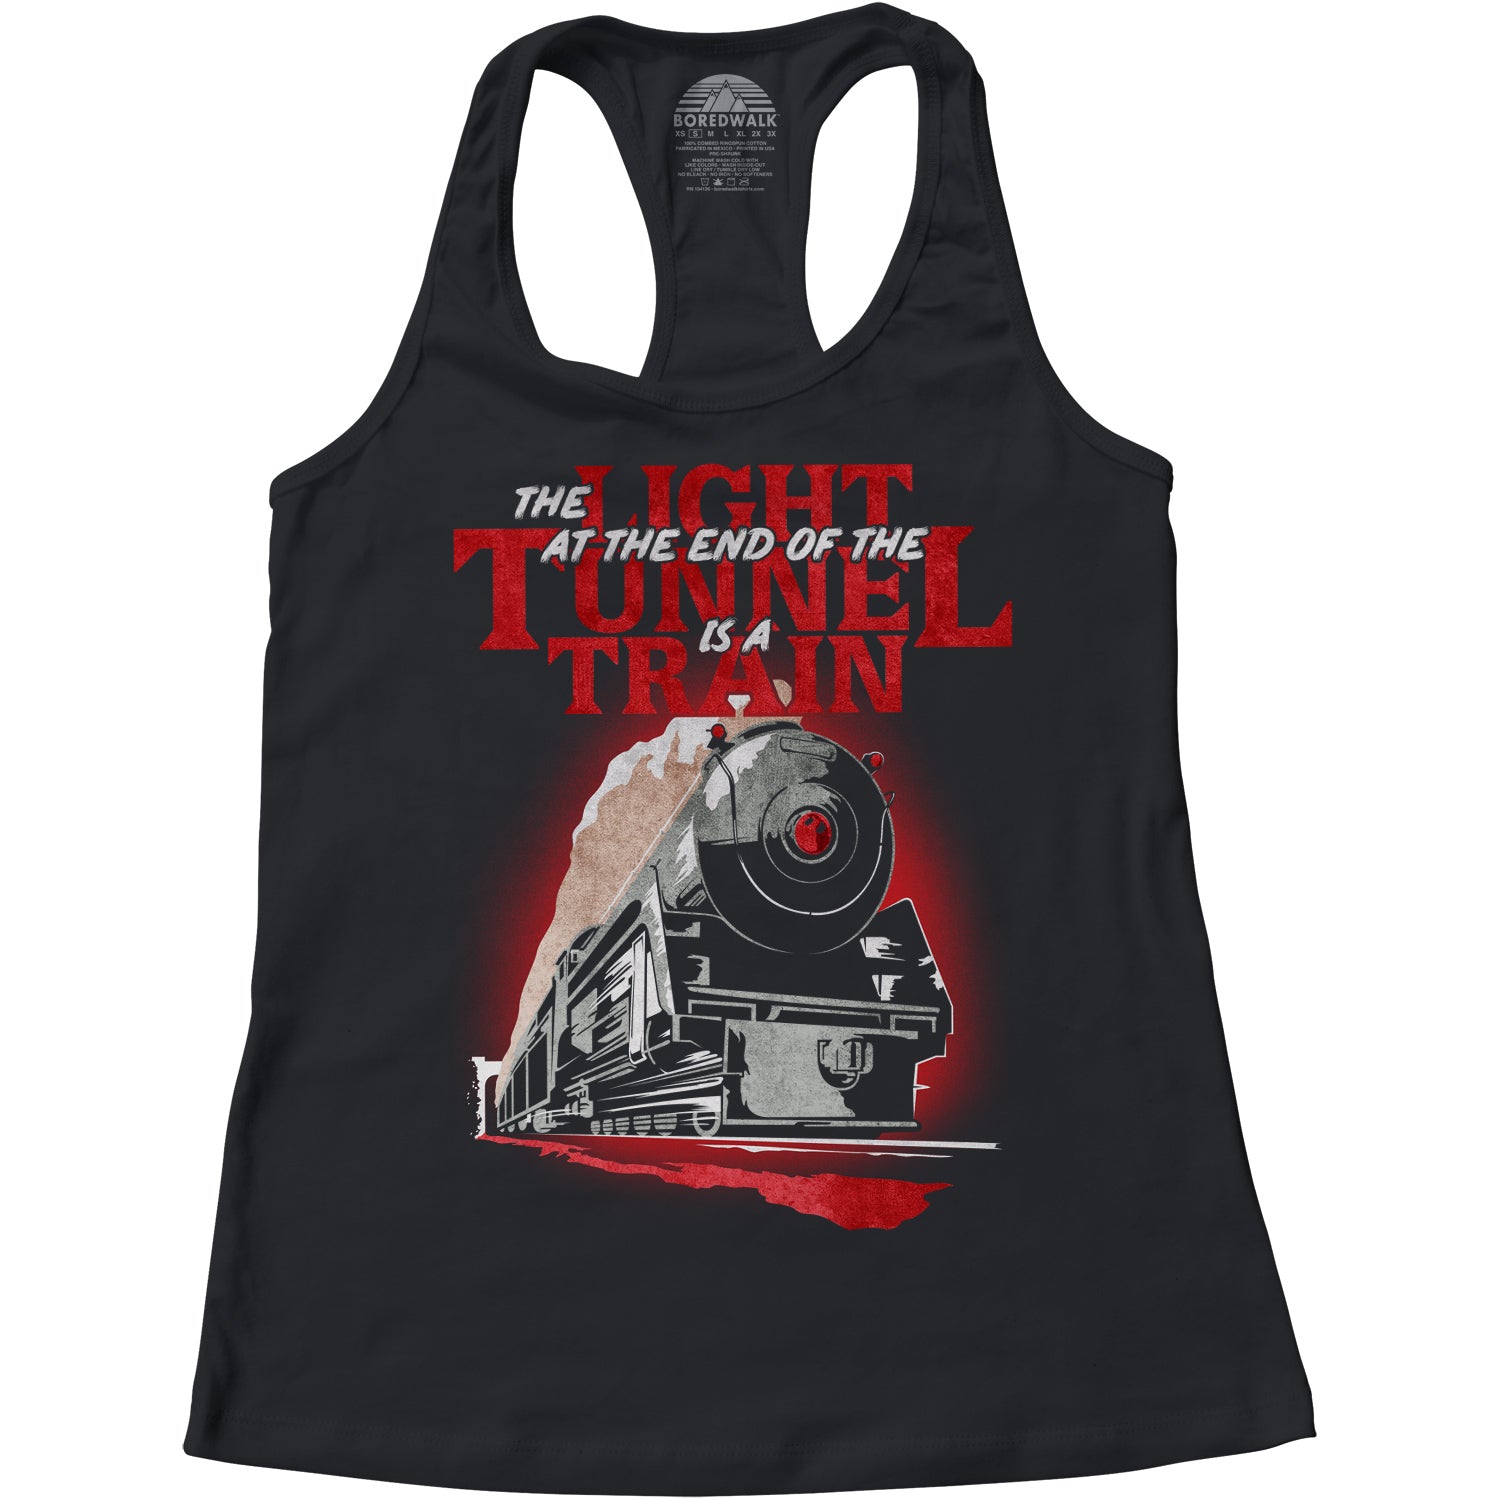 Women's The Light at The End of The Tunnel is a Train Racerback Tank Top